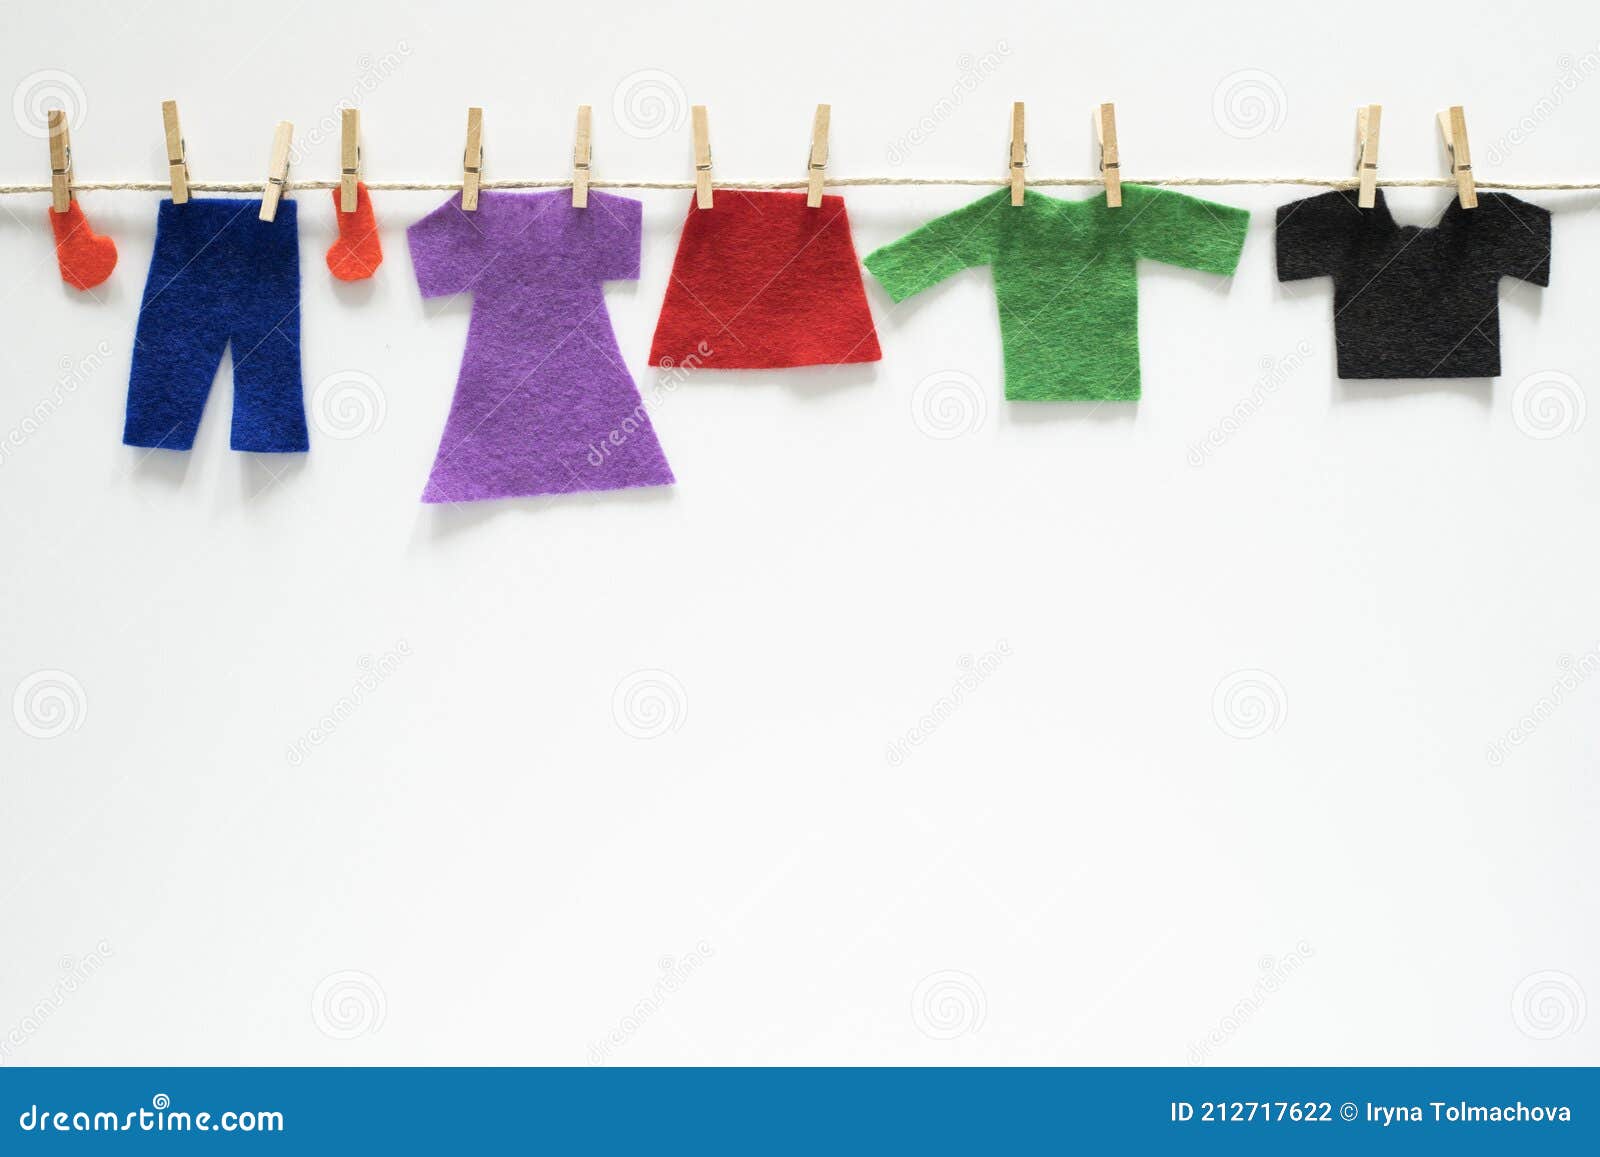 Felt Clothes Hanging on Rope on White Background. Art Craft Creative  Concept Stock Photo - Image of play, creative: 212717622